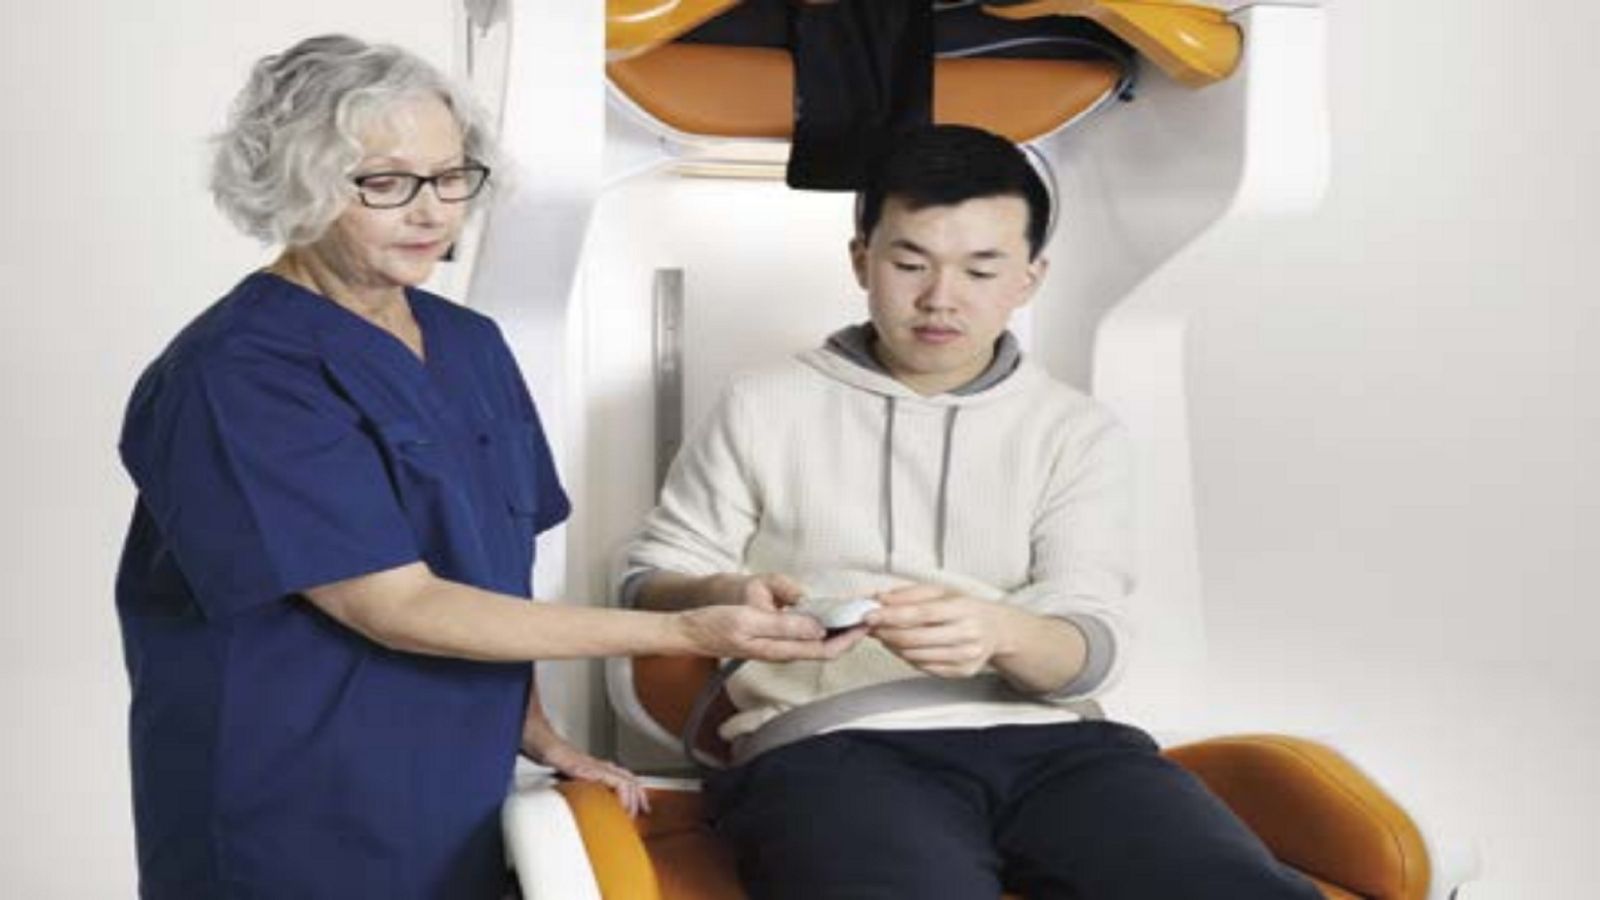 Man sitting in a portable MRI machine with a female medical professional in blue scrubs standing beside him.